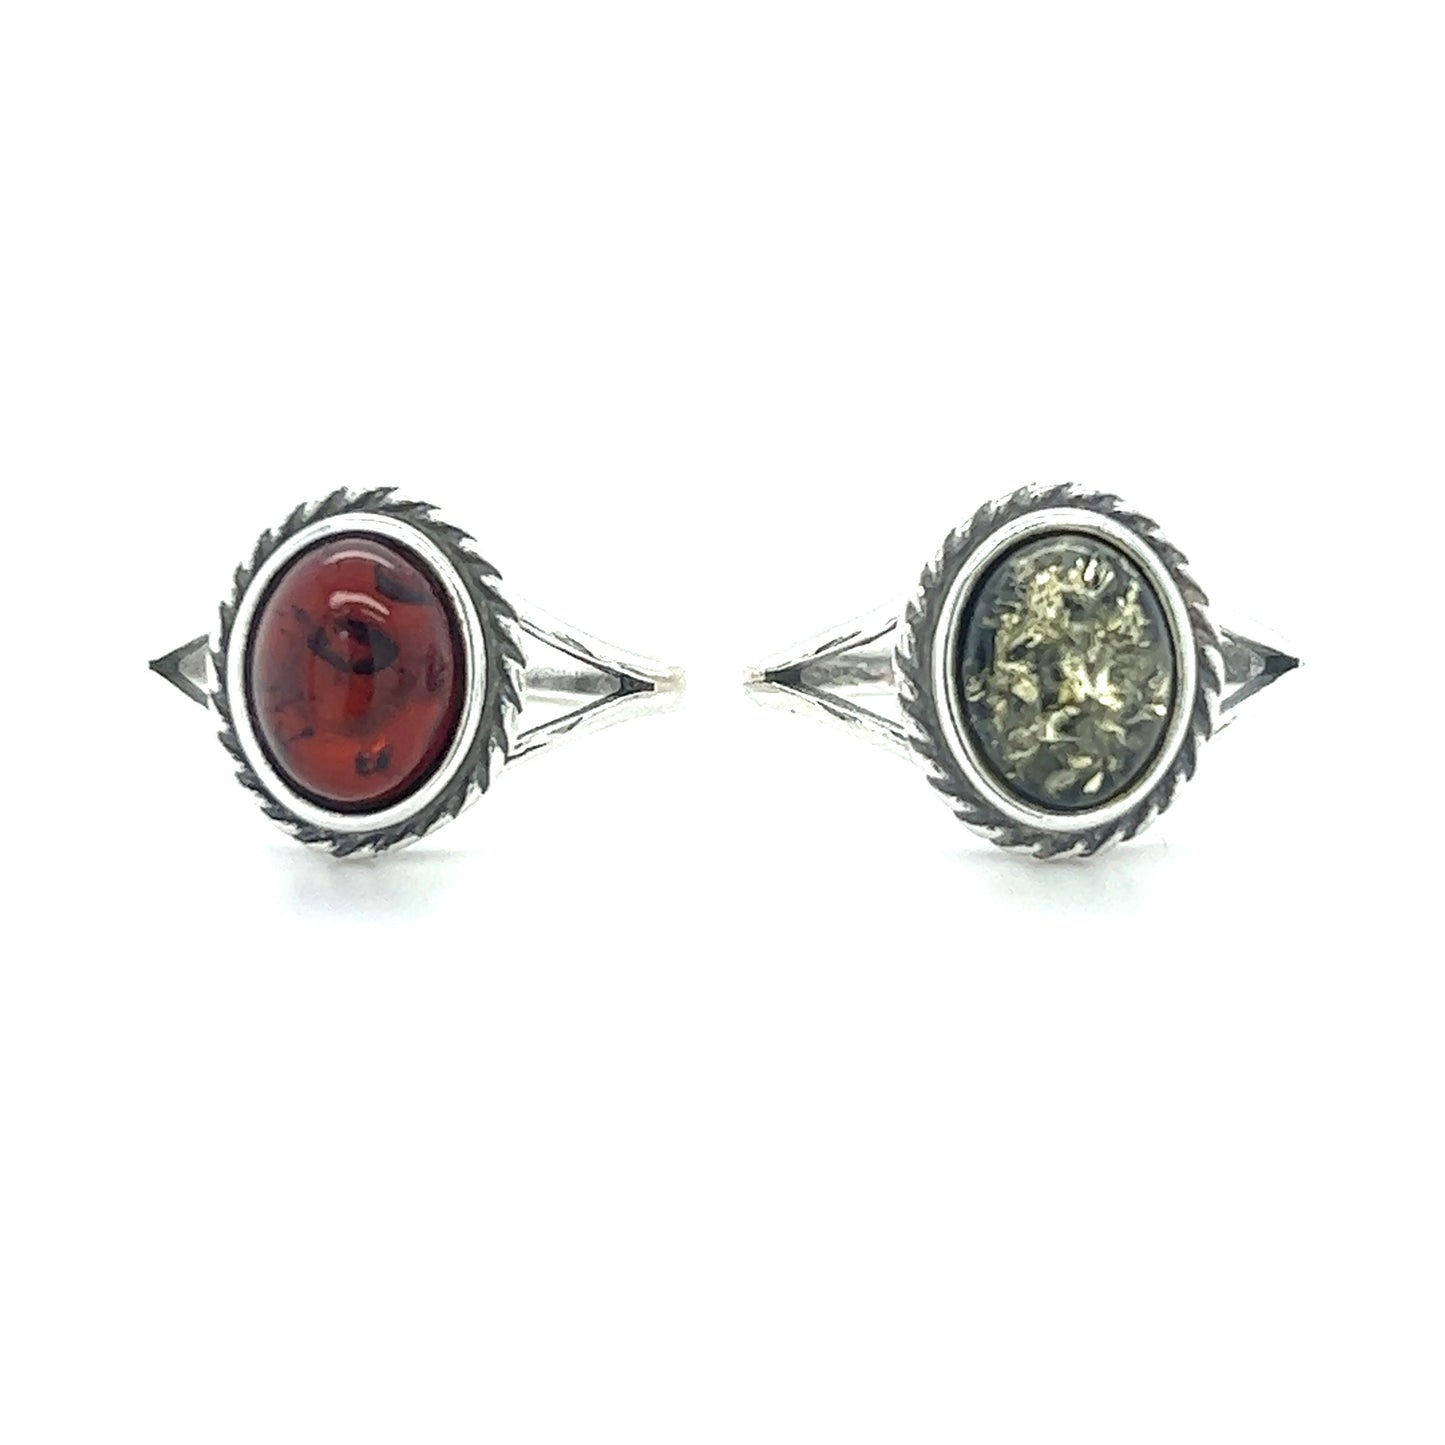 A pair of Timeless Baltic Amber rings with Twisted Border for healing and promoting mental clarity, made by Super Silver.